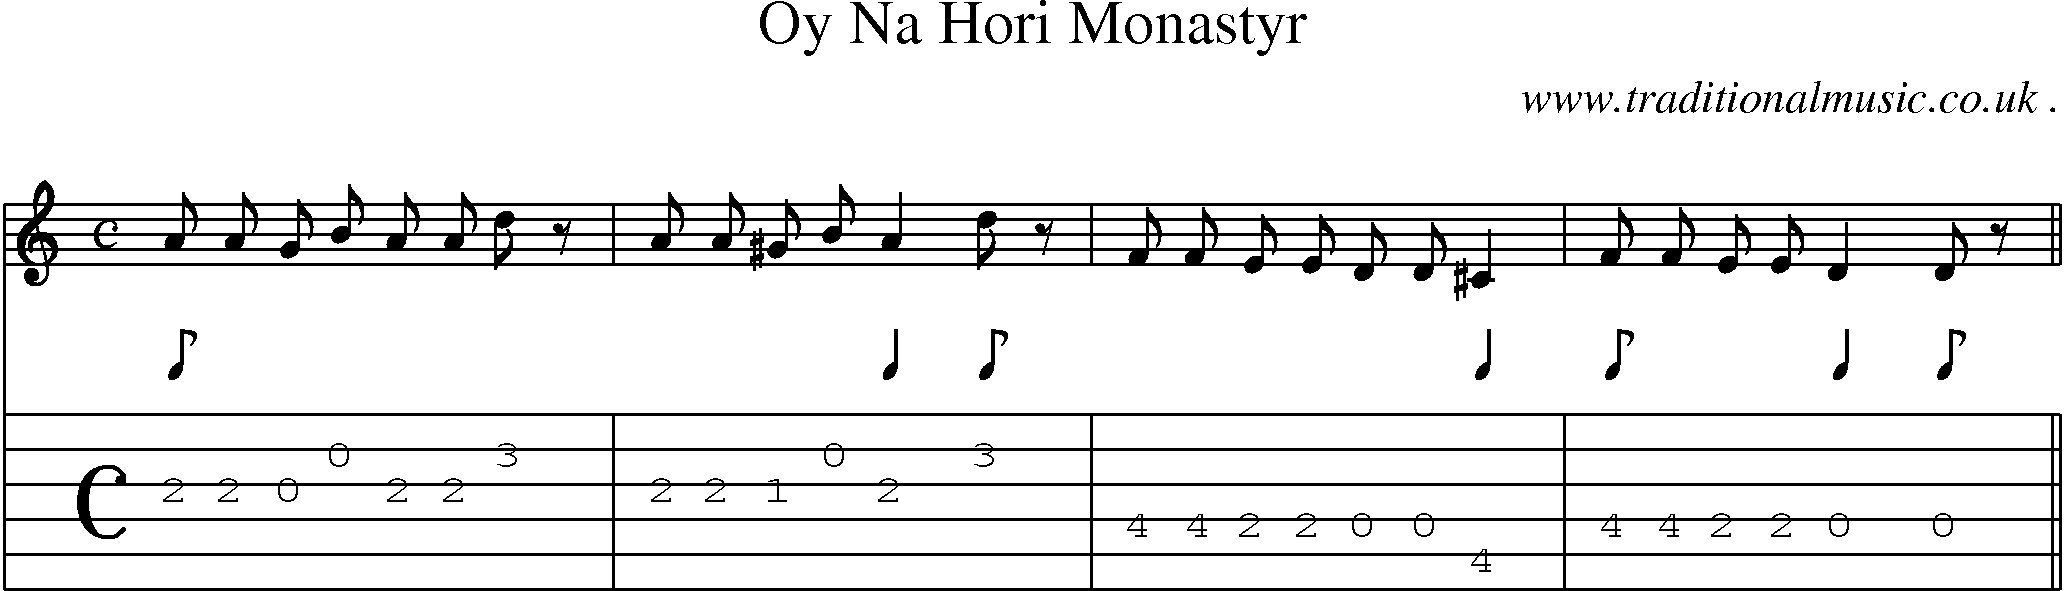 Sheet-Music and Guitar Tabs for Oy Na Hori Monastyr